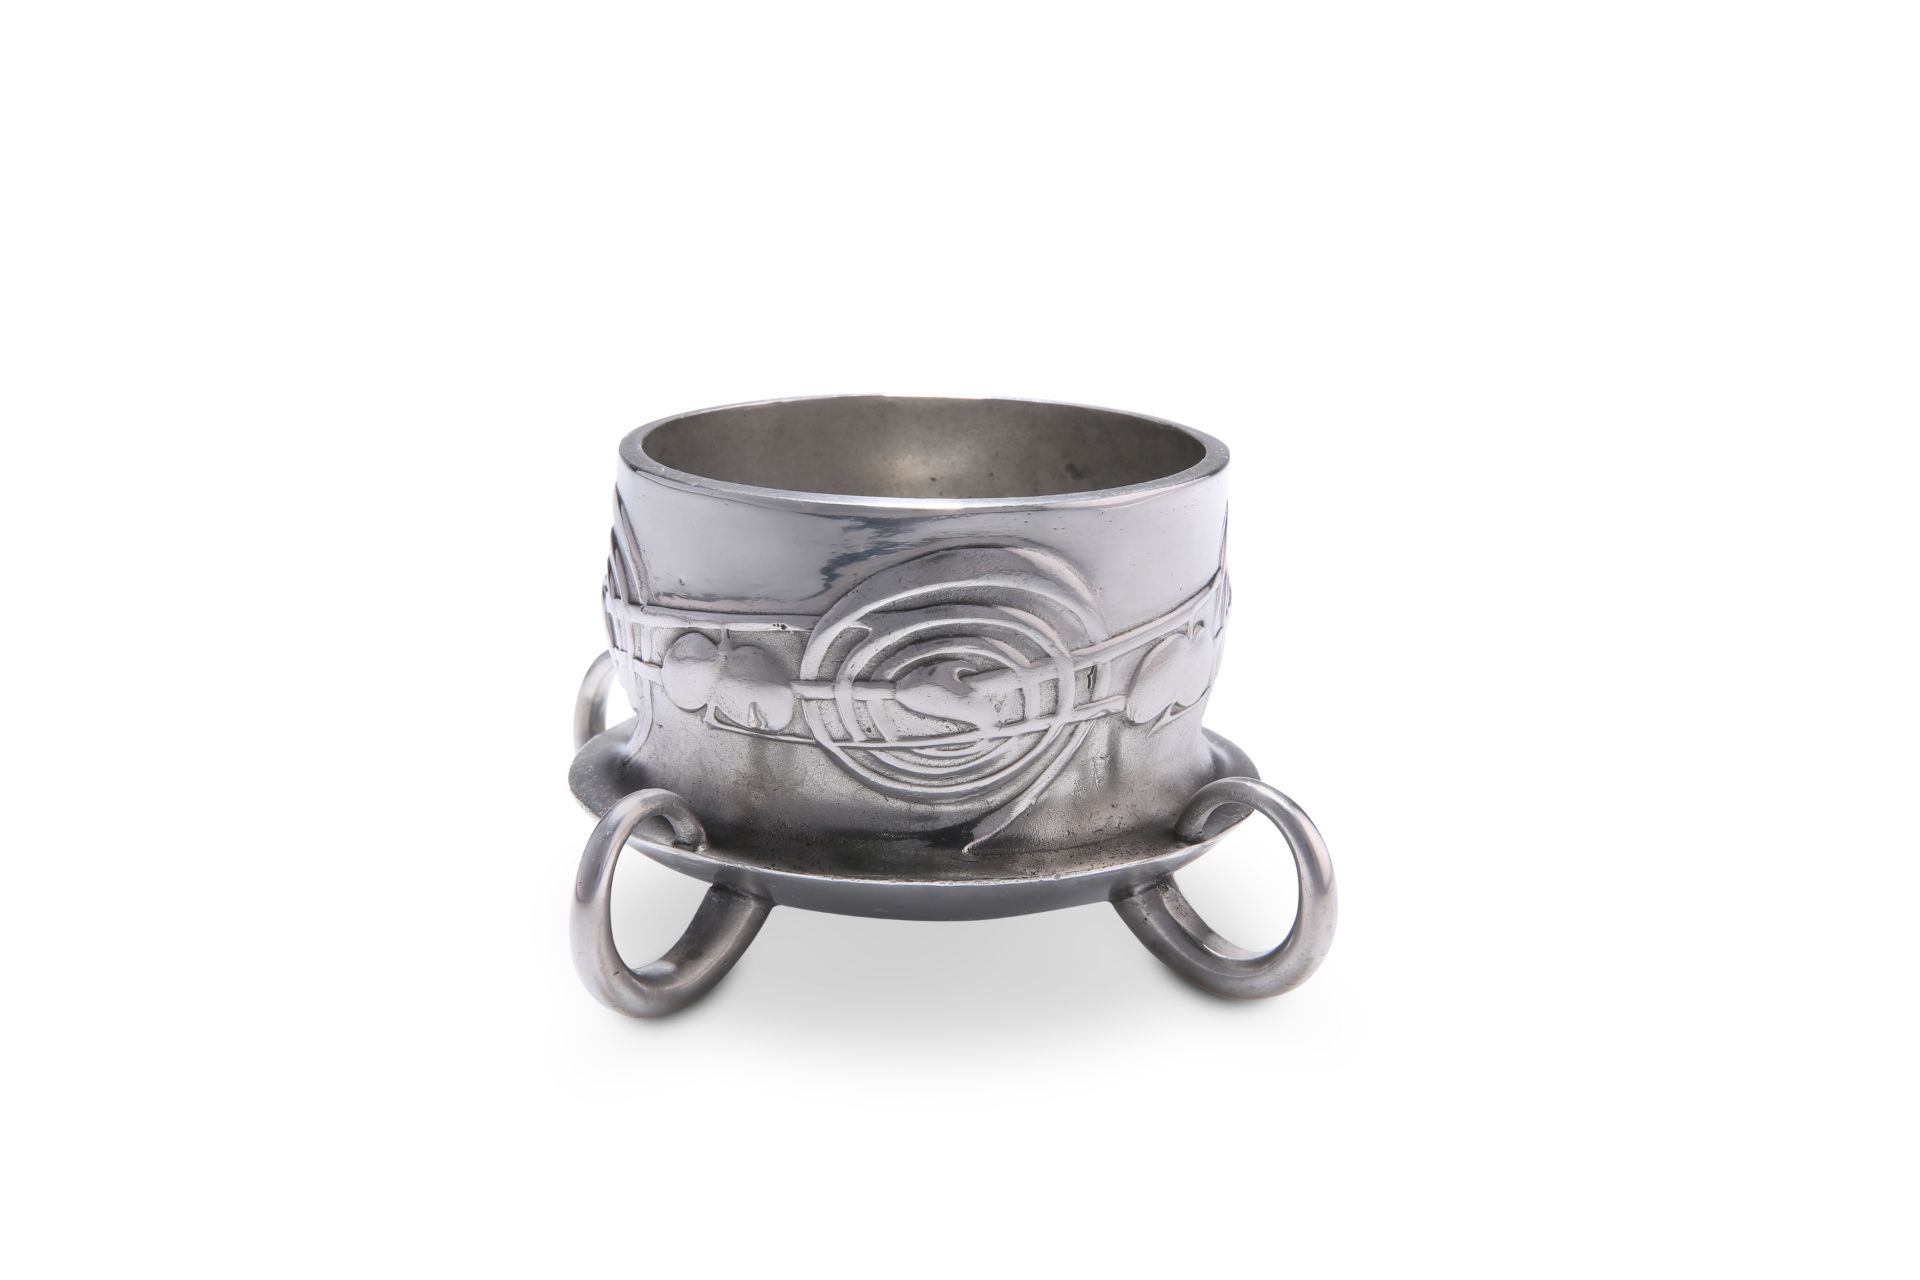 A LIBERTY & CO TUDRIC PEWTER FERNER BOWL, NO. 0288